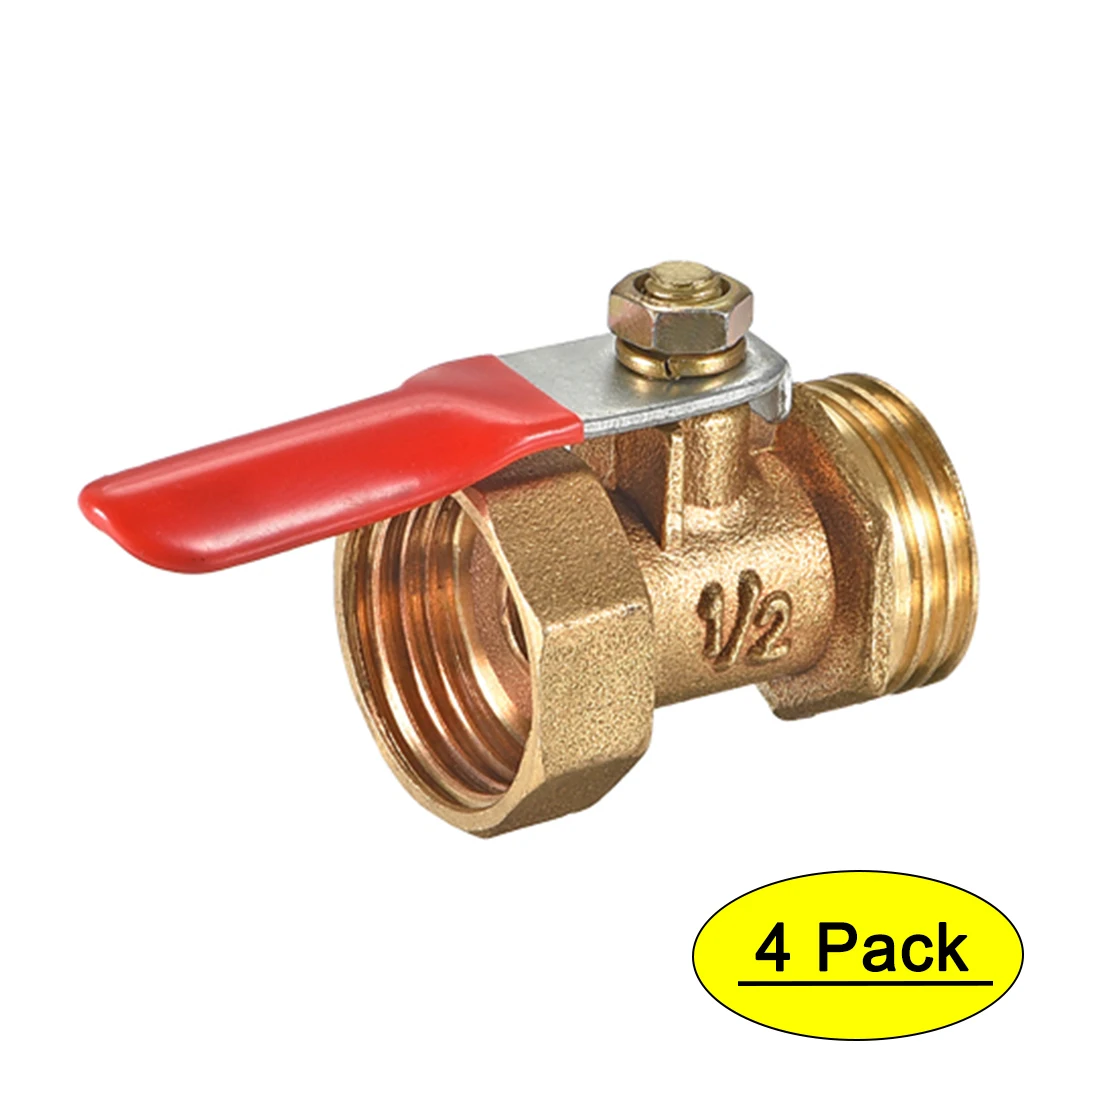 

uxcell Brass Air Ball Valve Shut Off Switch G1/2 Male to Female Pipe Coupler 4Pcs